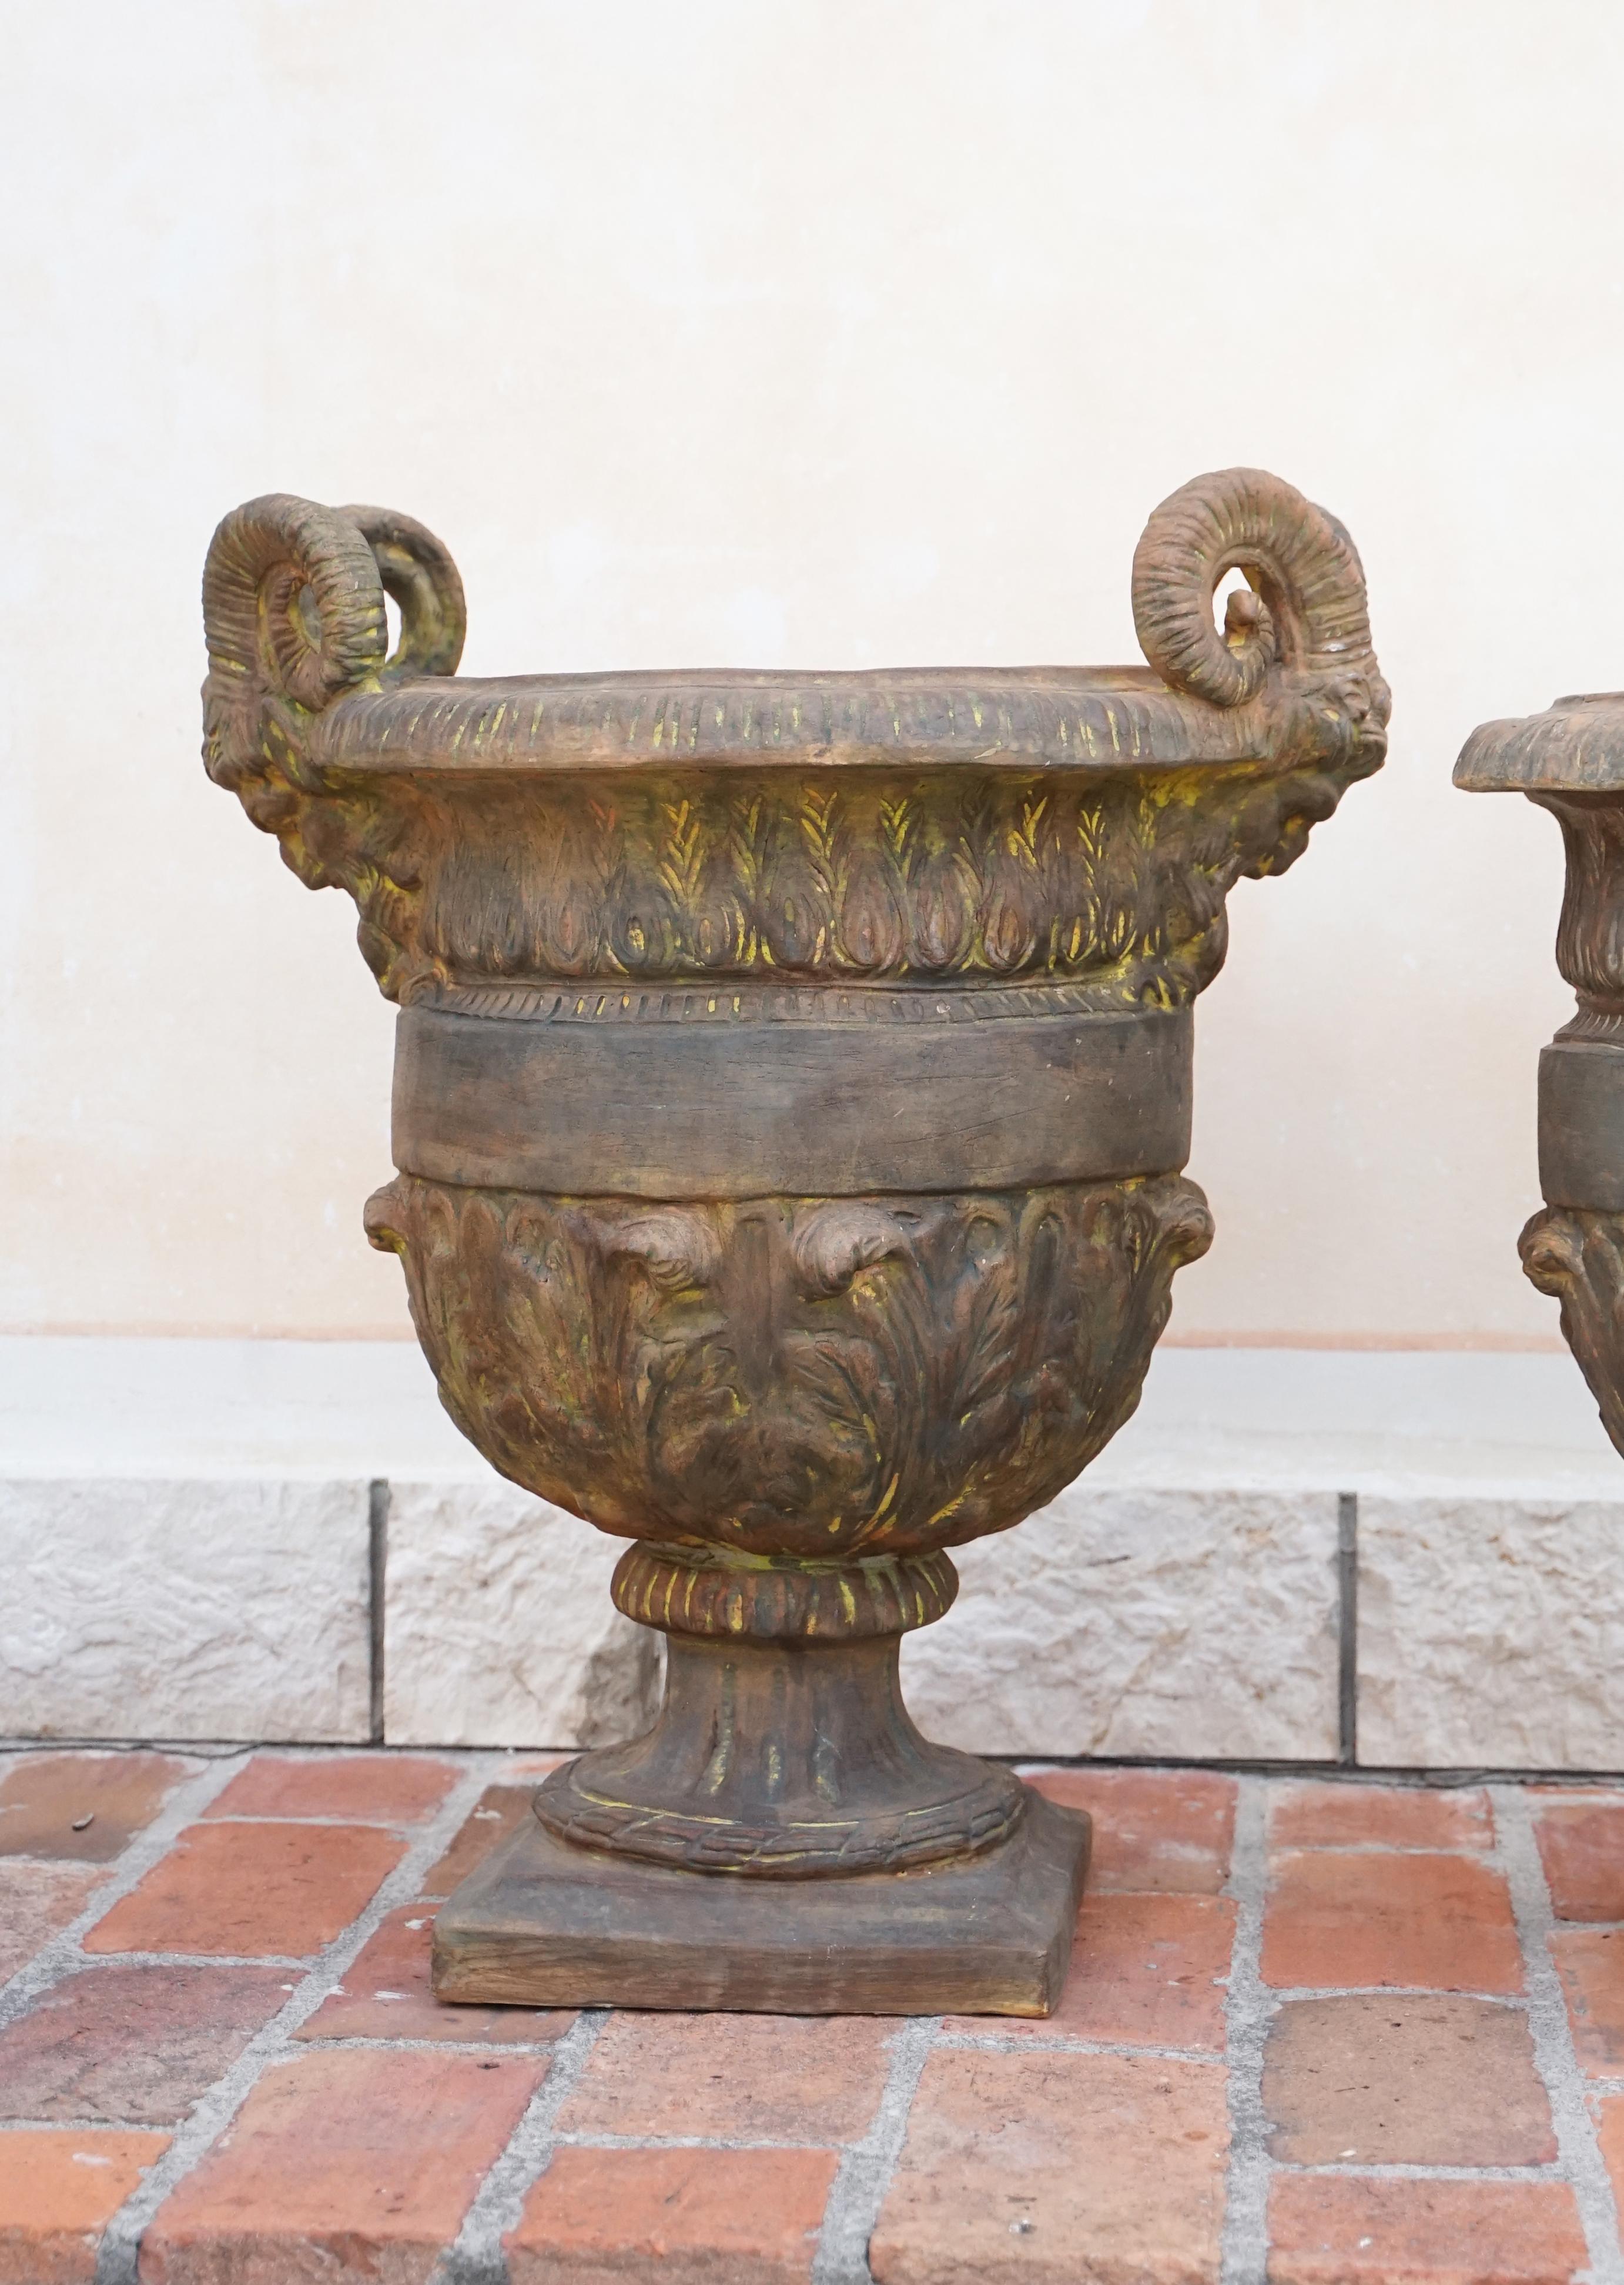 Material: Terracotta
Dimensions: diameter 50 cm, height 70 cm
Condition: Good condition, with some minor restorations due to the passage of time
Origin: Impruneta - Italy
Description: This splendid pair of Tuscan terracotta vases stands out for